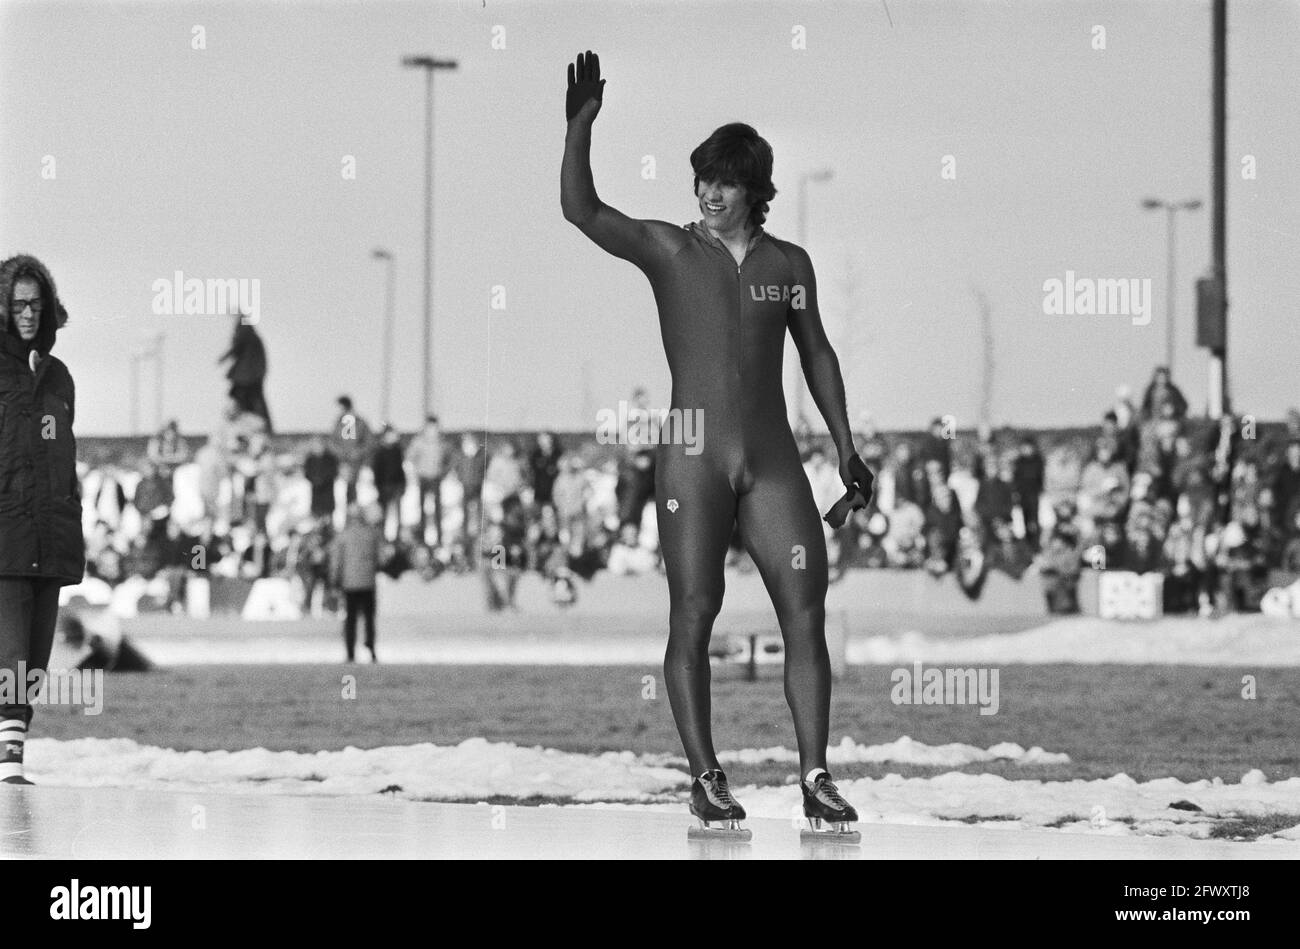 Eric Heiden (United States) waving to the crowd during the exit after his ride in the 3000 meters, February 25, 1979, skating, sports, The Netherlands Stock Photo